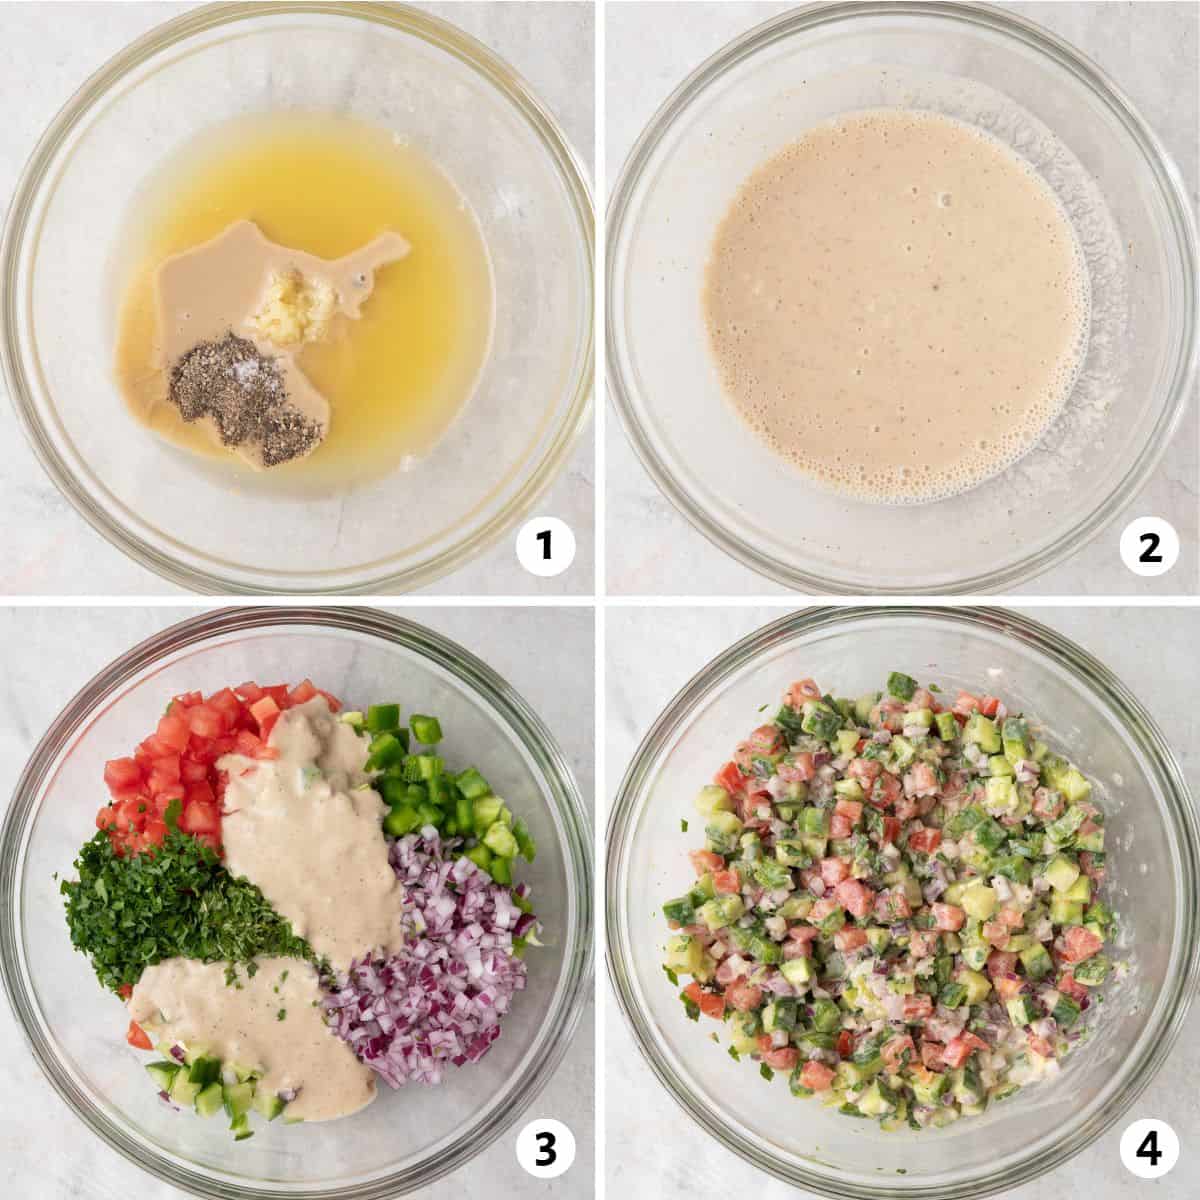 4 image collage making recipe: 1- salad dressing ingredients in a bowl before combining, 2- dressing after mixed, 3- chopped herbs and veggies in bowl with dressing poured on top, 4- salad tossed with dressing.